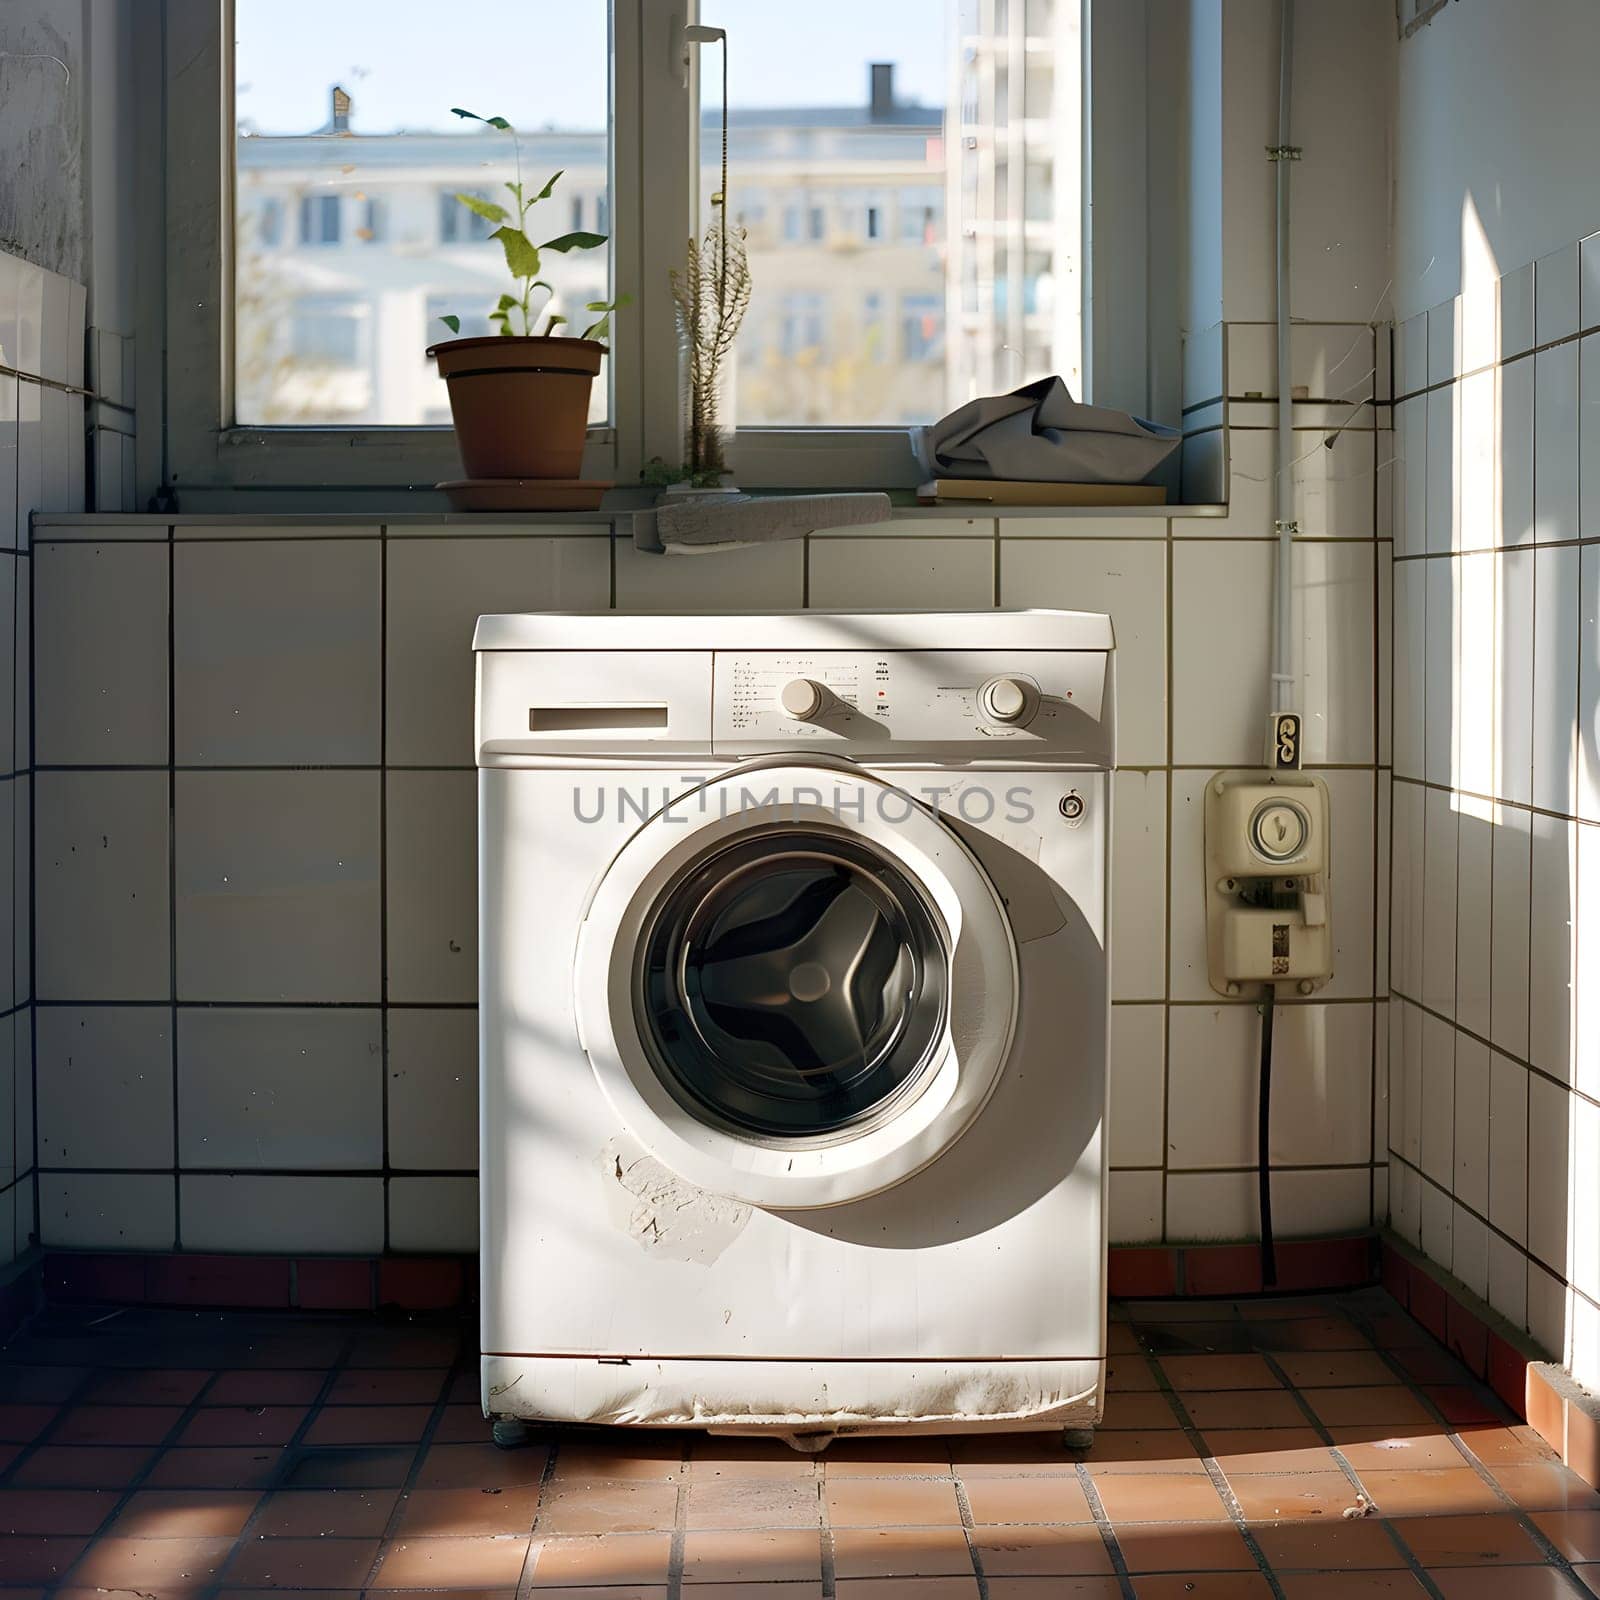 A white washing machine is installed in the laundry room next to a window, complemented by cabinetry and a clothes dryer. The fixture is a major home appliance, standing on the floor